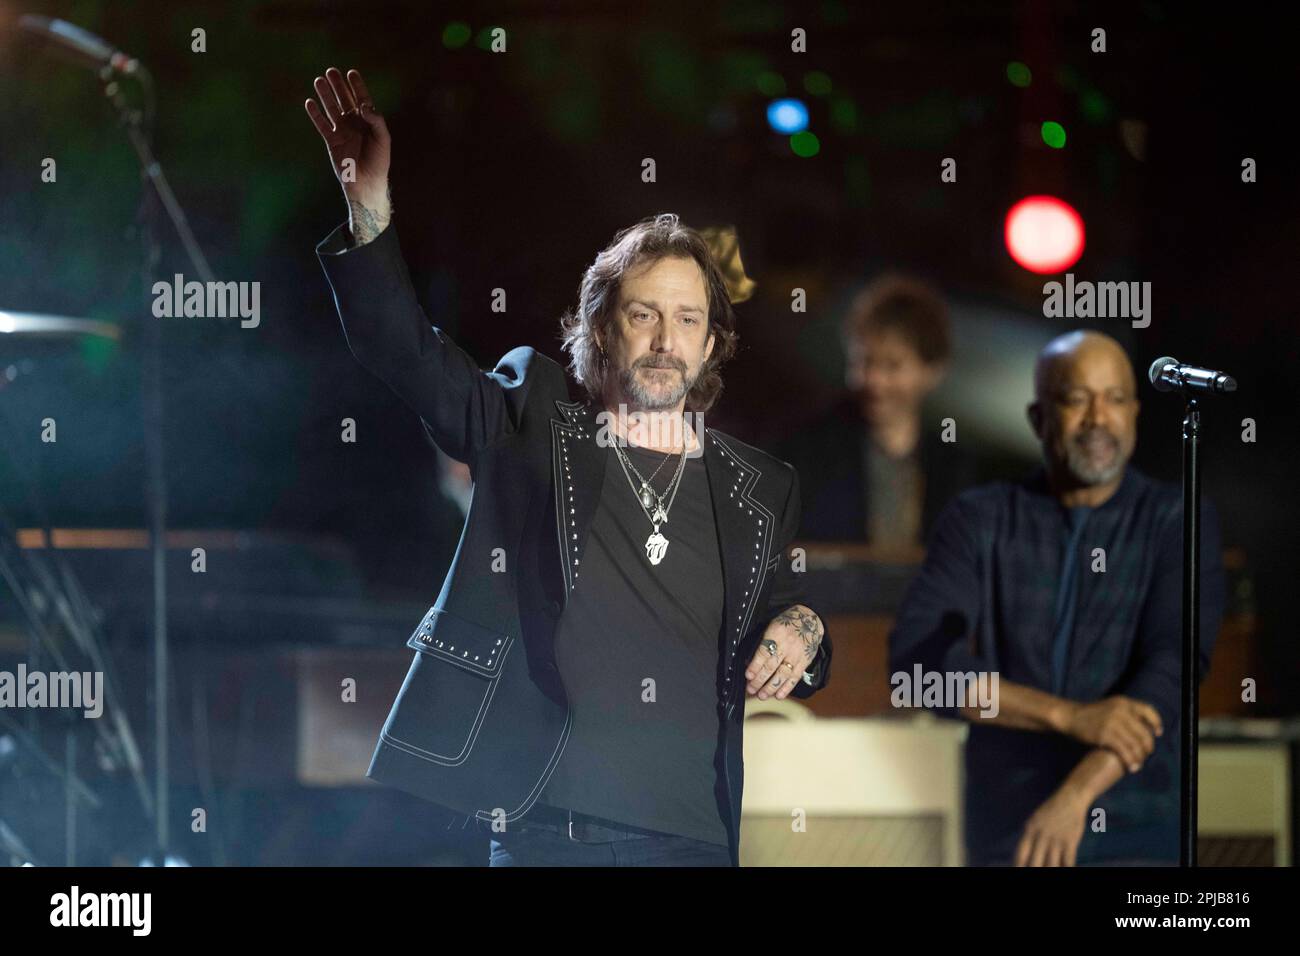 Austin Texas USA, March 31, 2023: Lead singer of rock & roll band The Black Crowes, CHRIS ROBINSON, performs onstage during a taping of Country Music Television's (CMT) Crossroads on an outdoor stage downtown. Credit: Bob Daemmrich/Alamy Live News Stock Photo